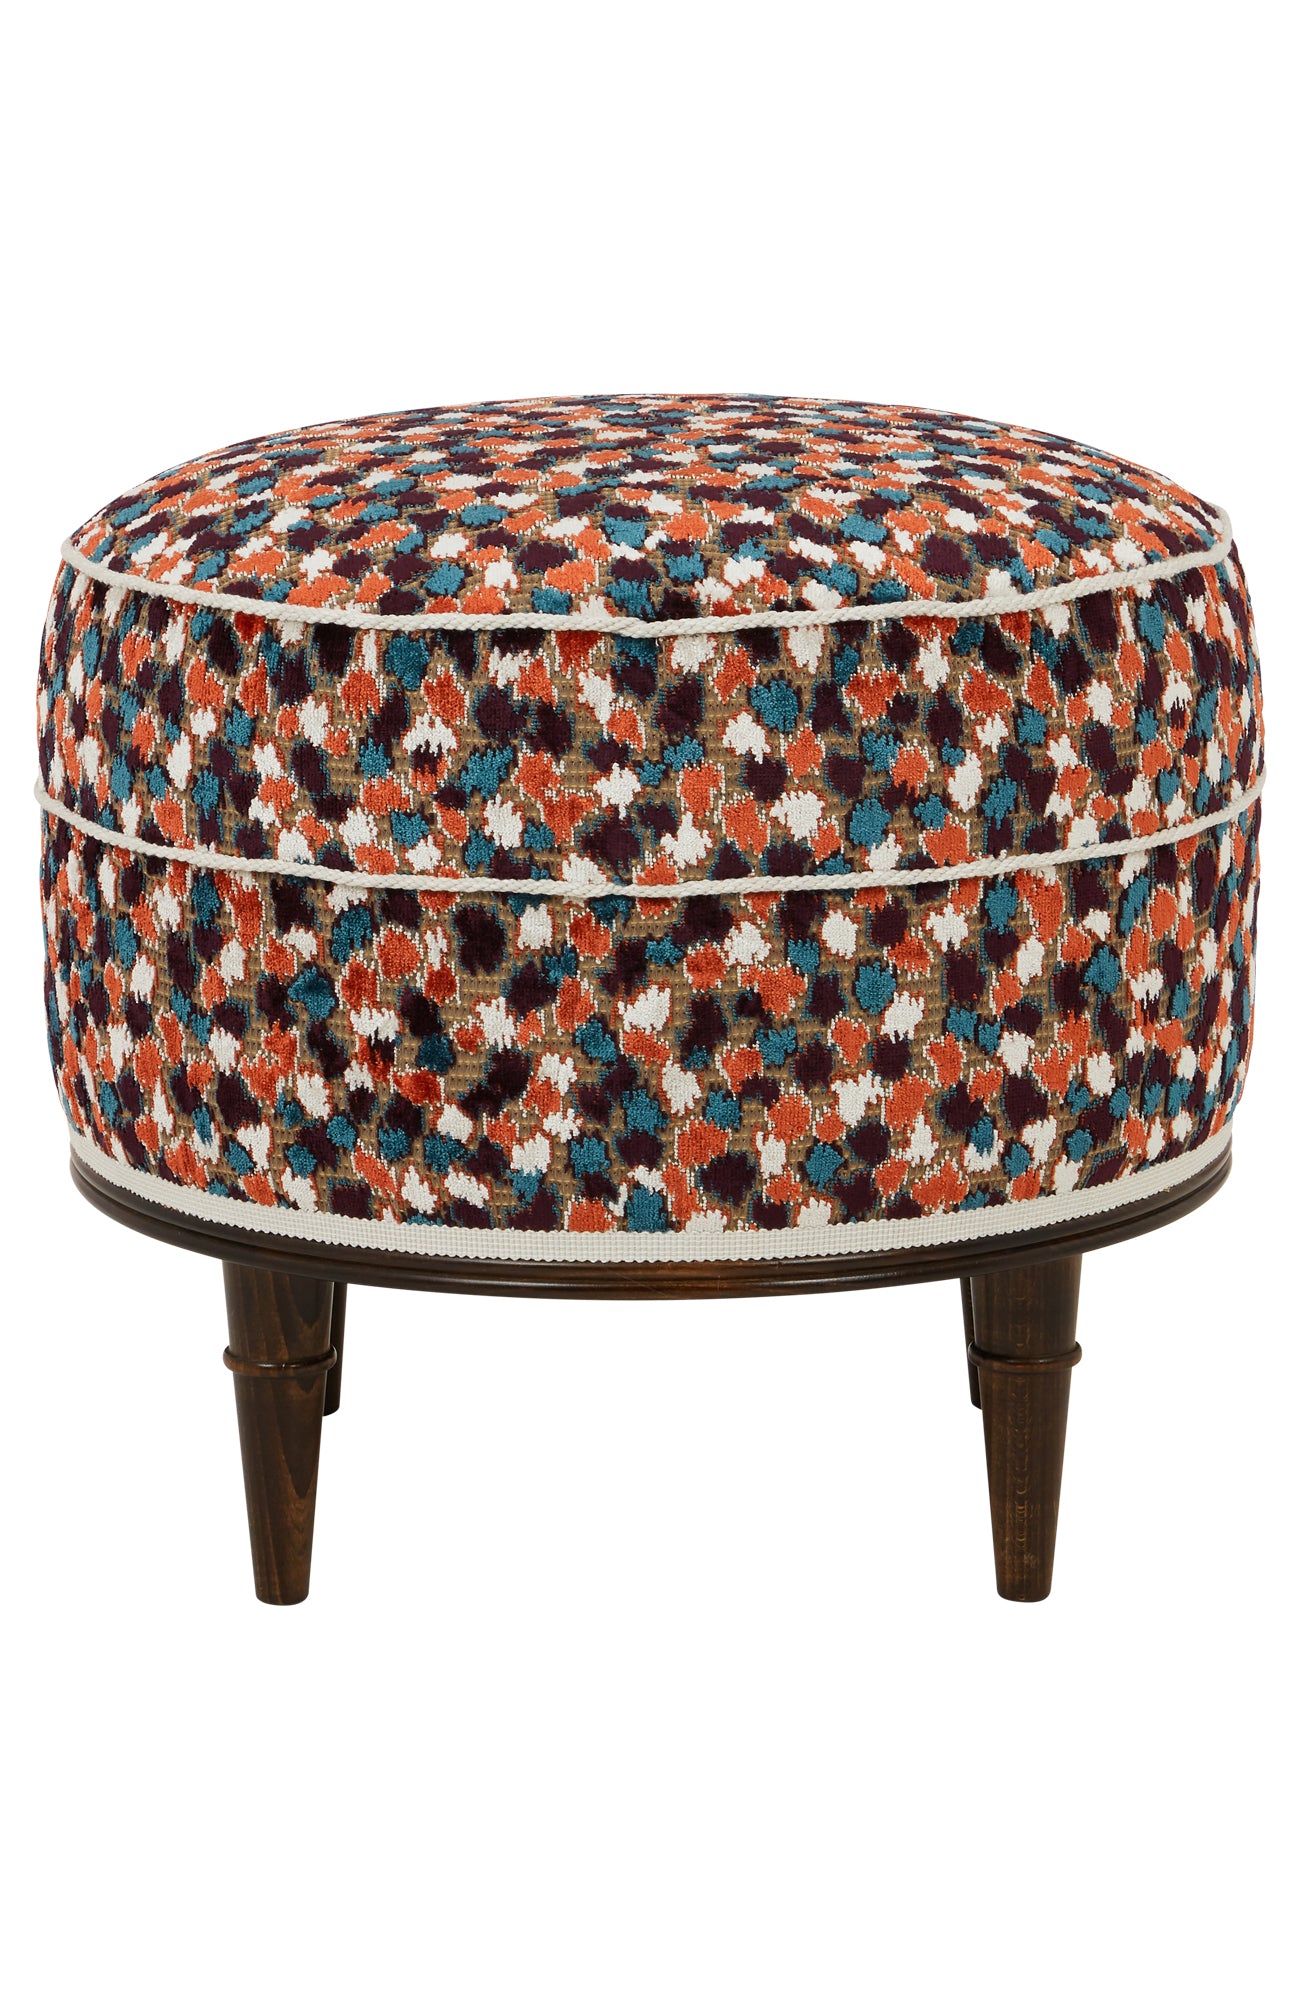 Alice Stool - Orford Peacock/Coral/Aubergine